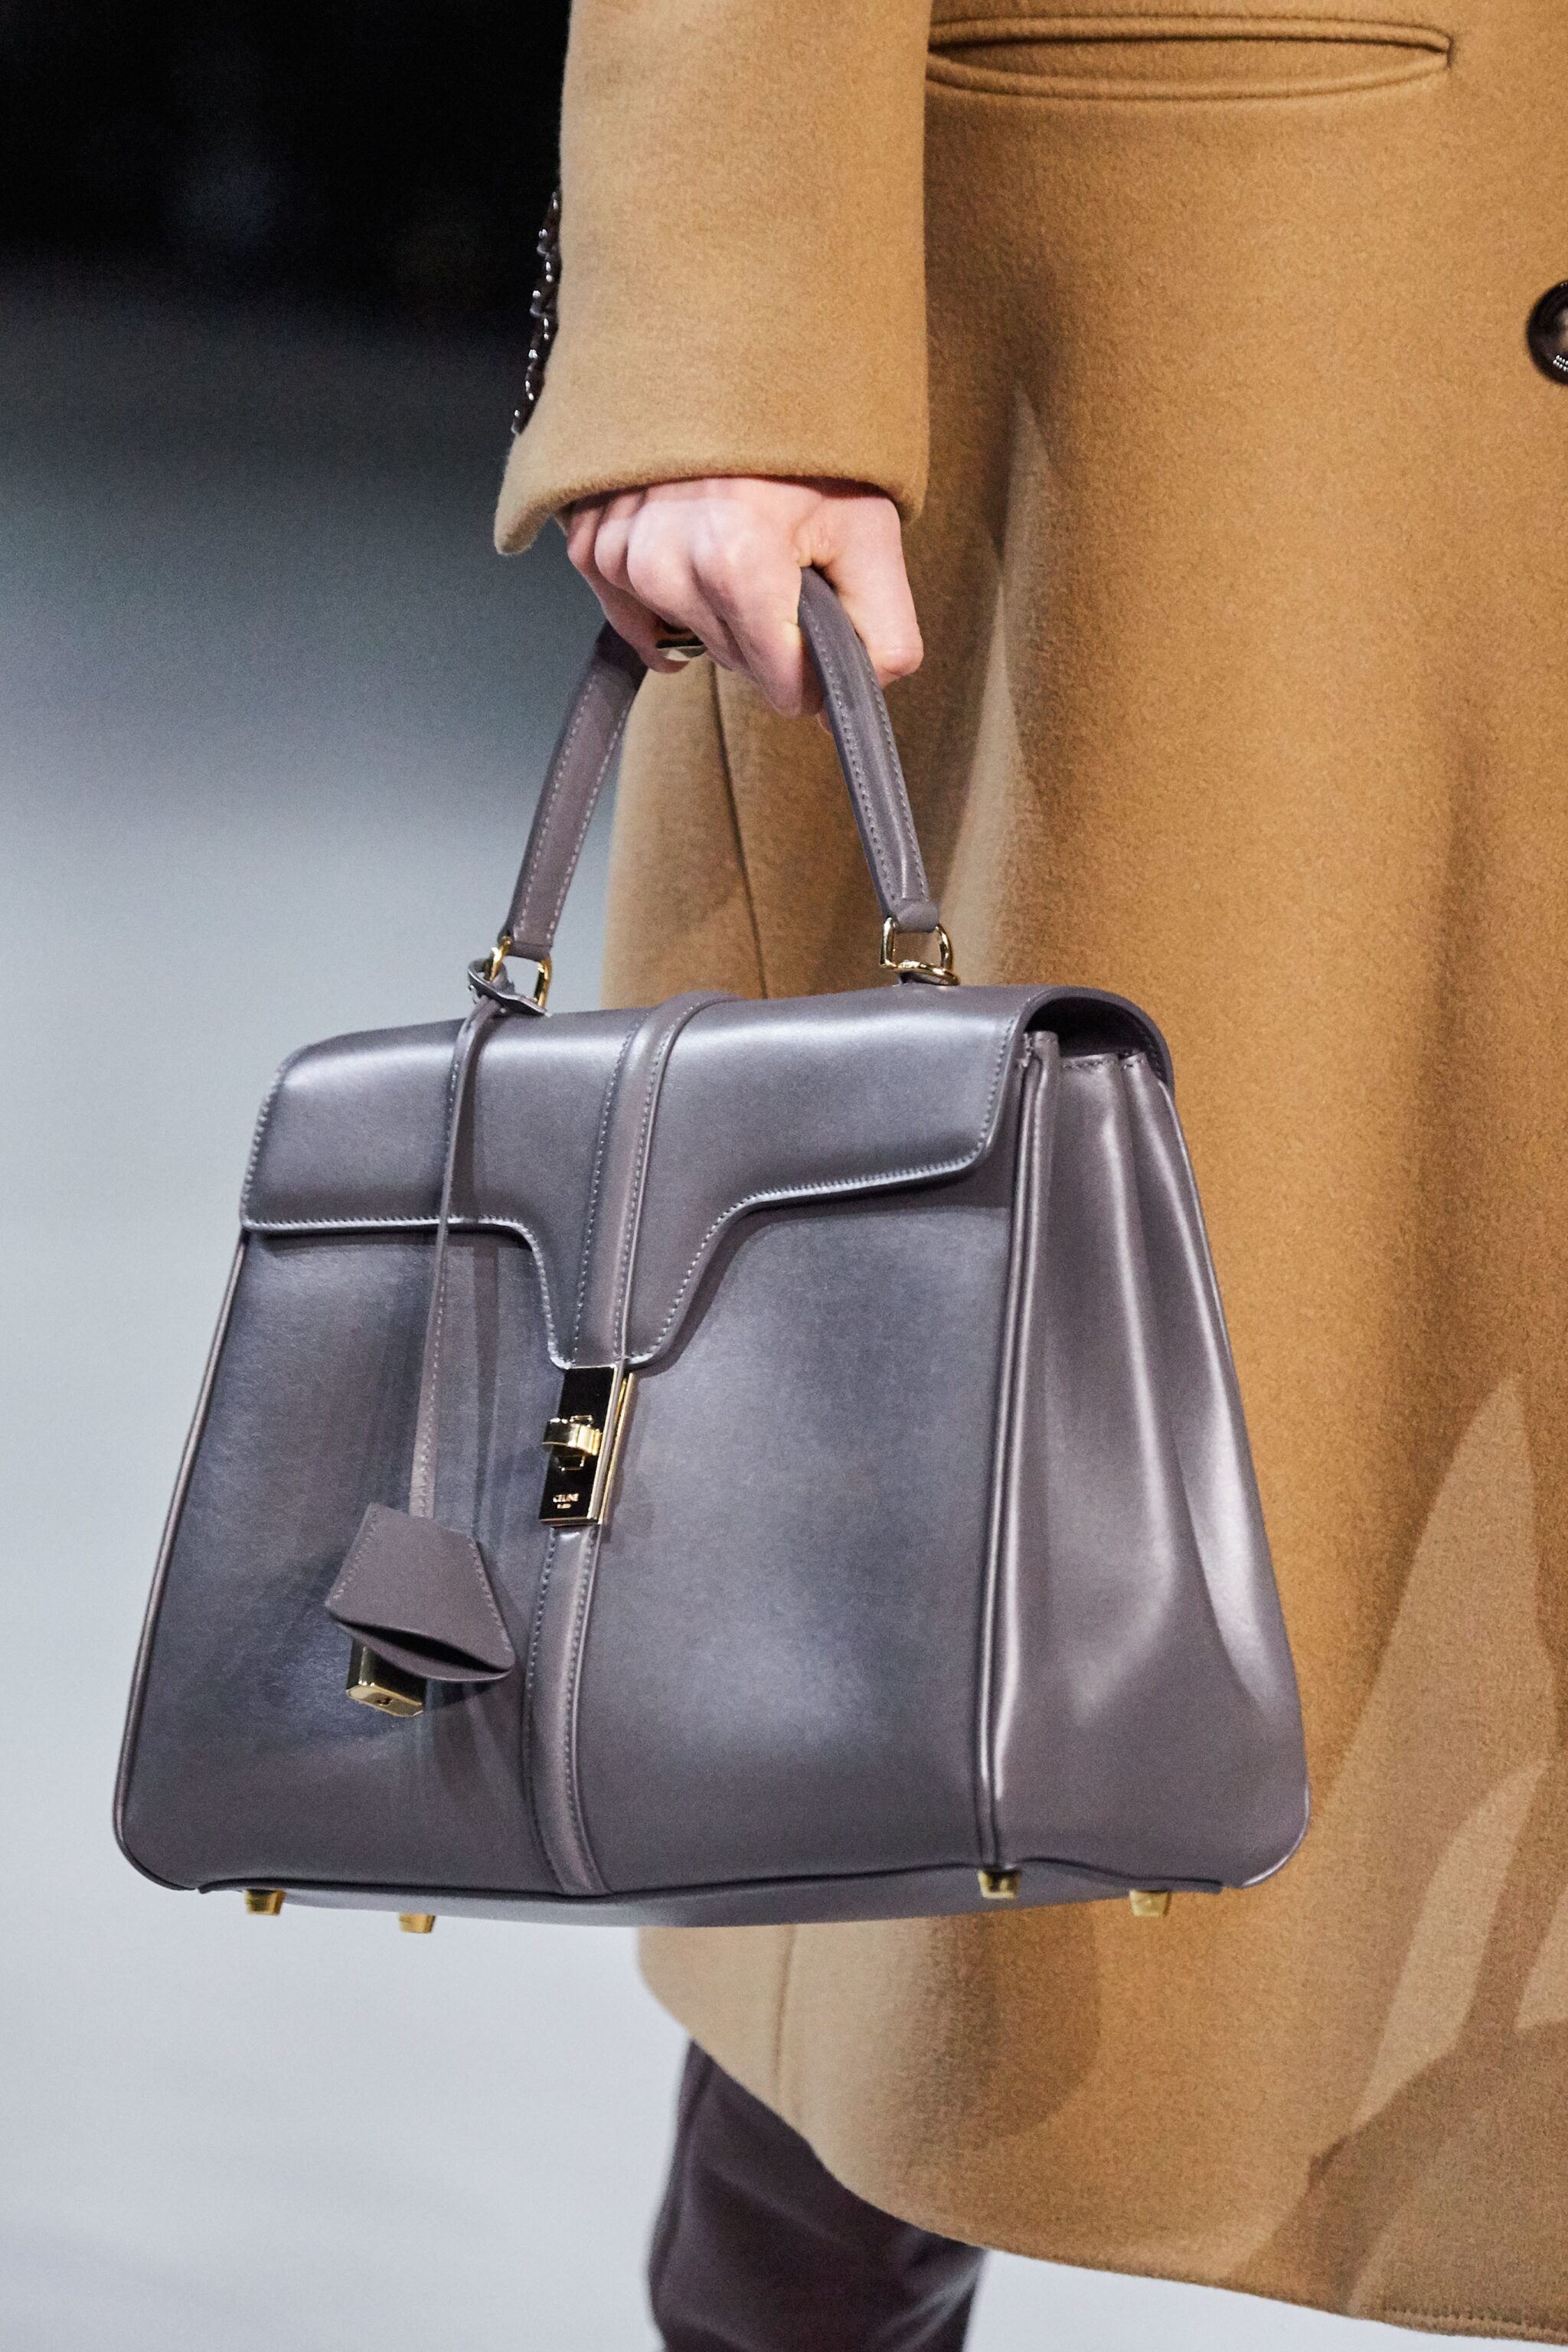 Celine Fall/Winter 2019 Runway Bag Collection Spotted Fashion